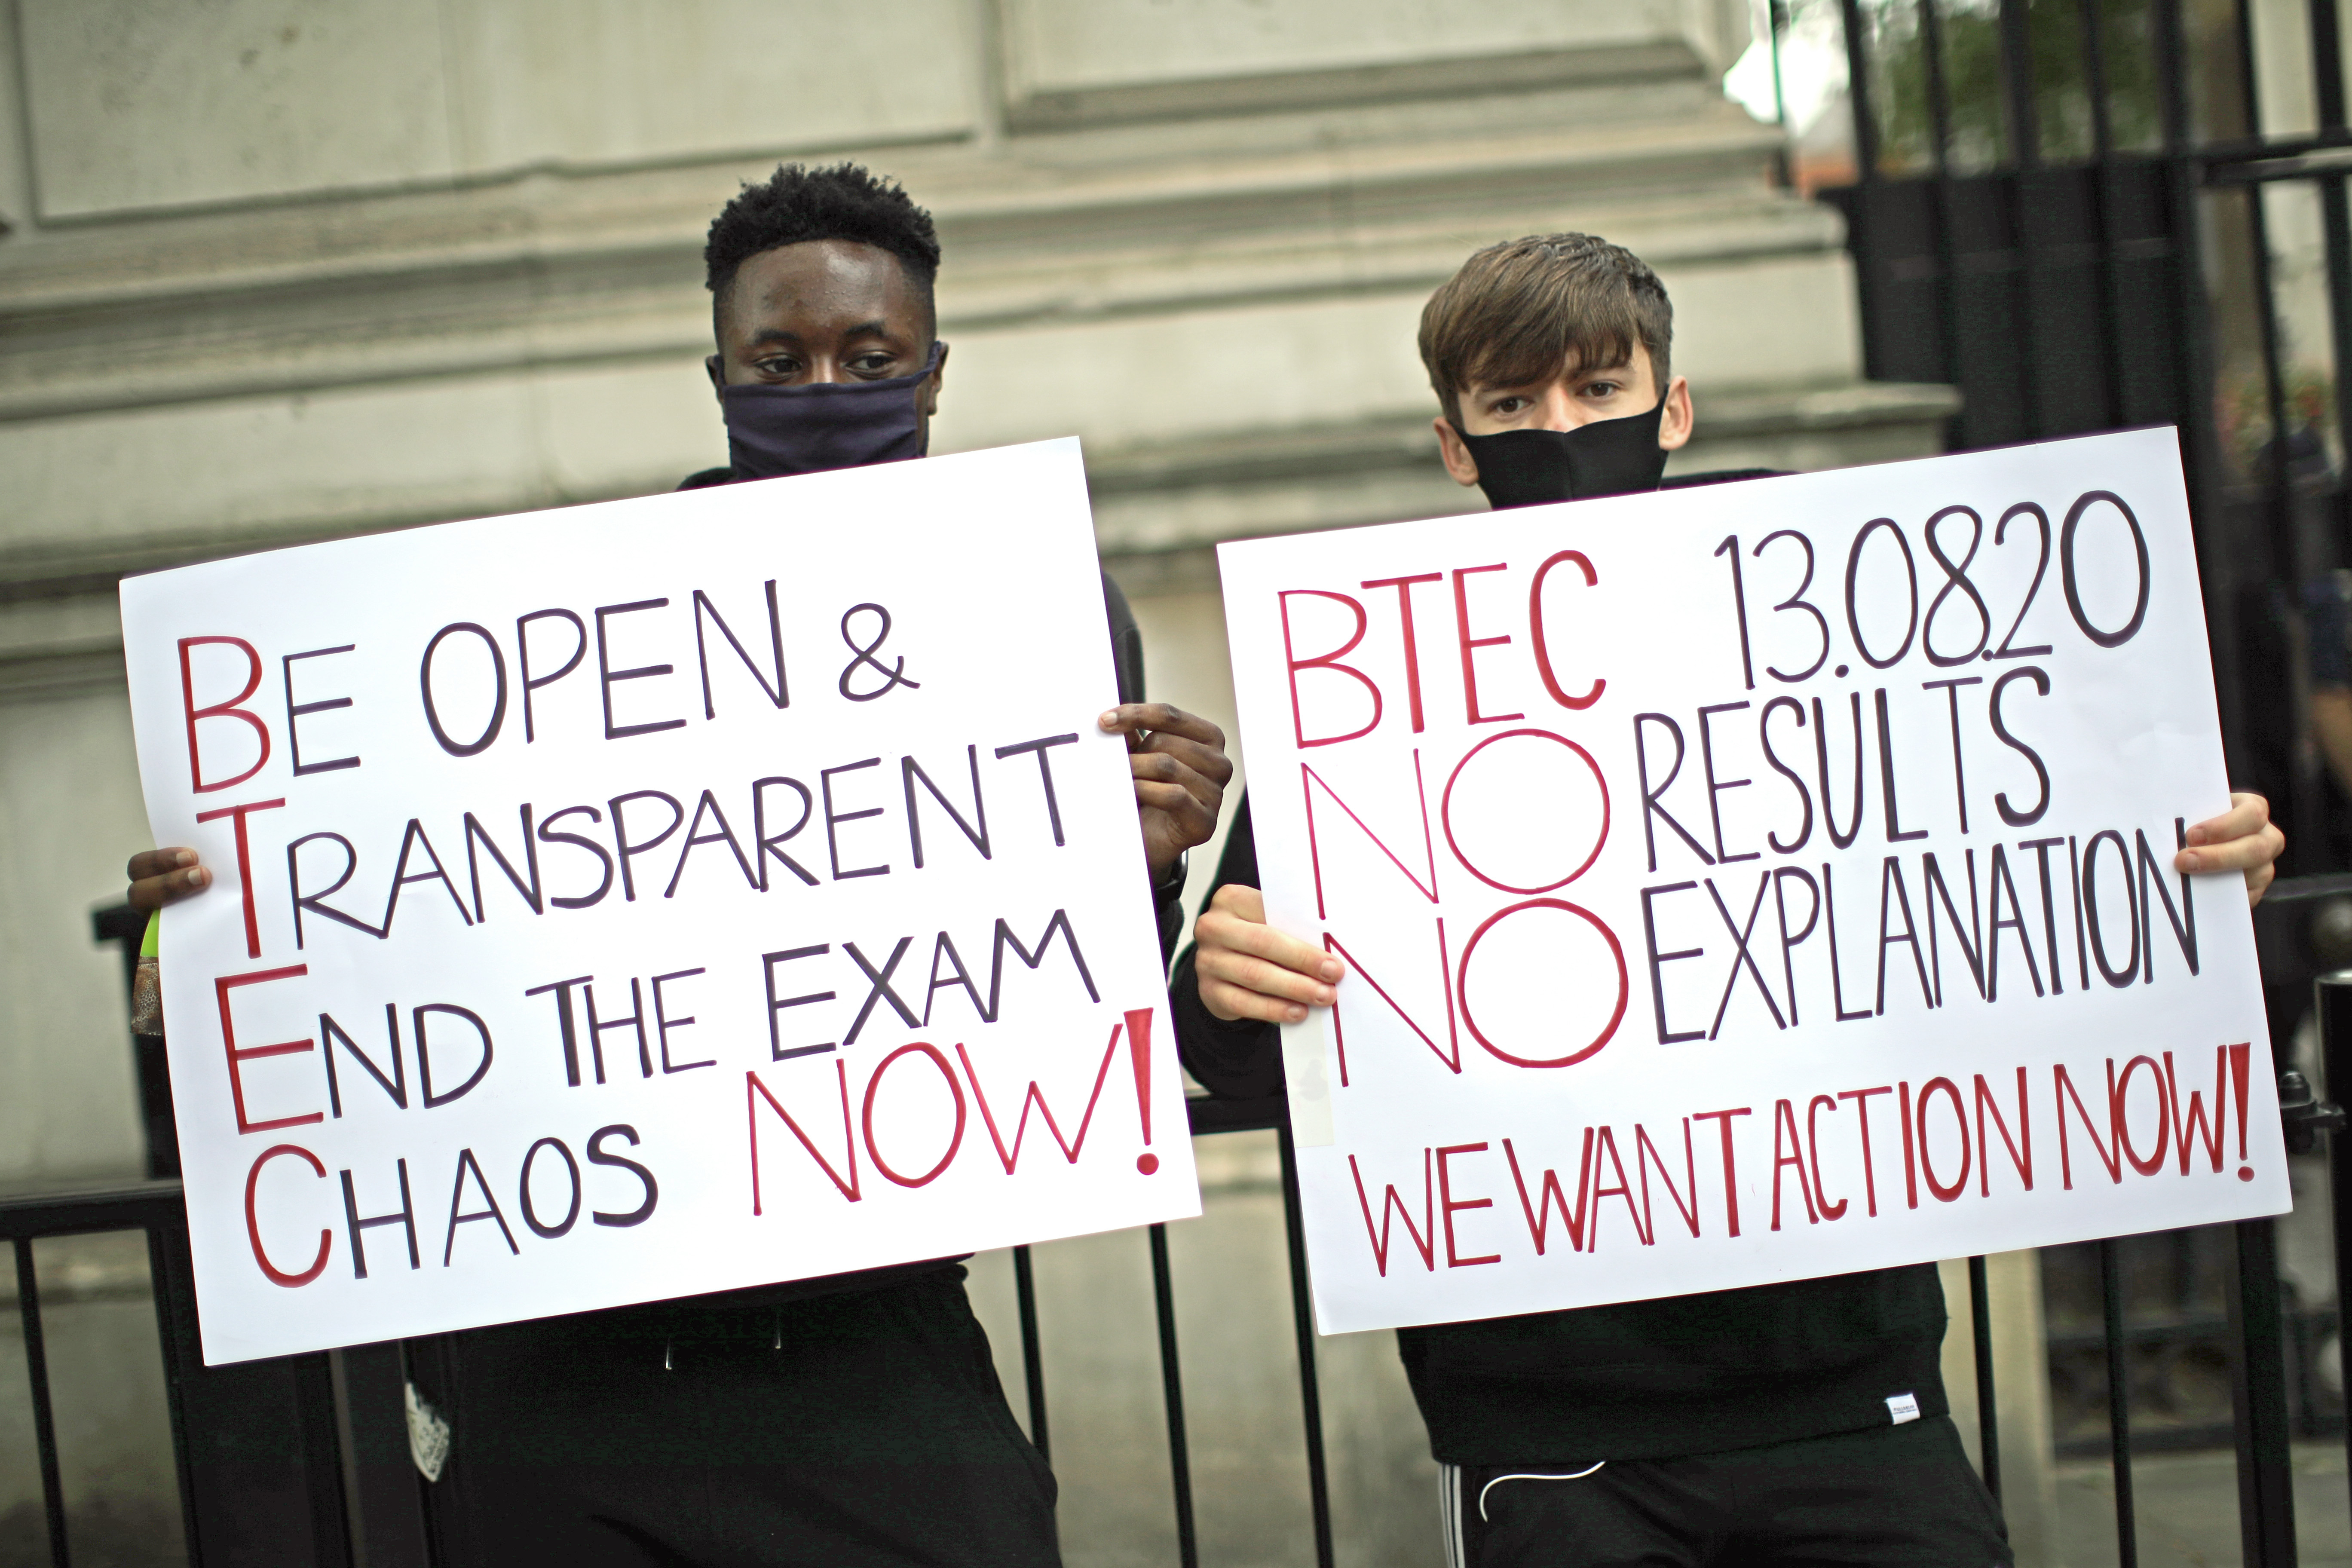 Protesters hold signs that read, “Be open &amp; transparent, end the exam chaos now!” and “BTFC 13.08.20 no results, no explanation. We want action now!”